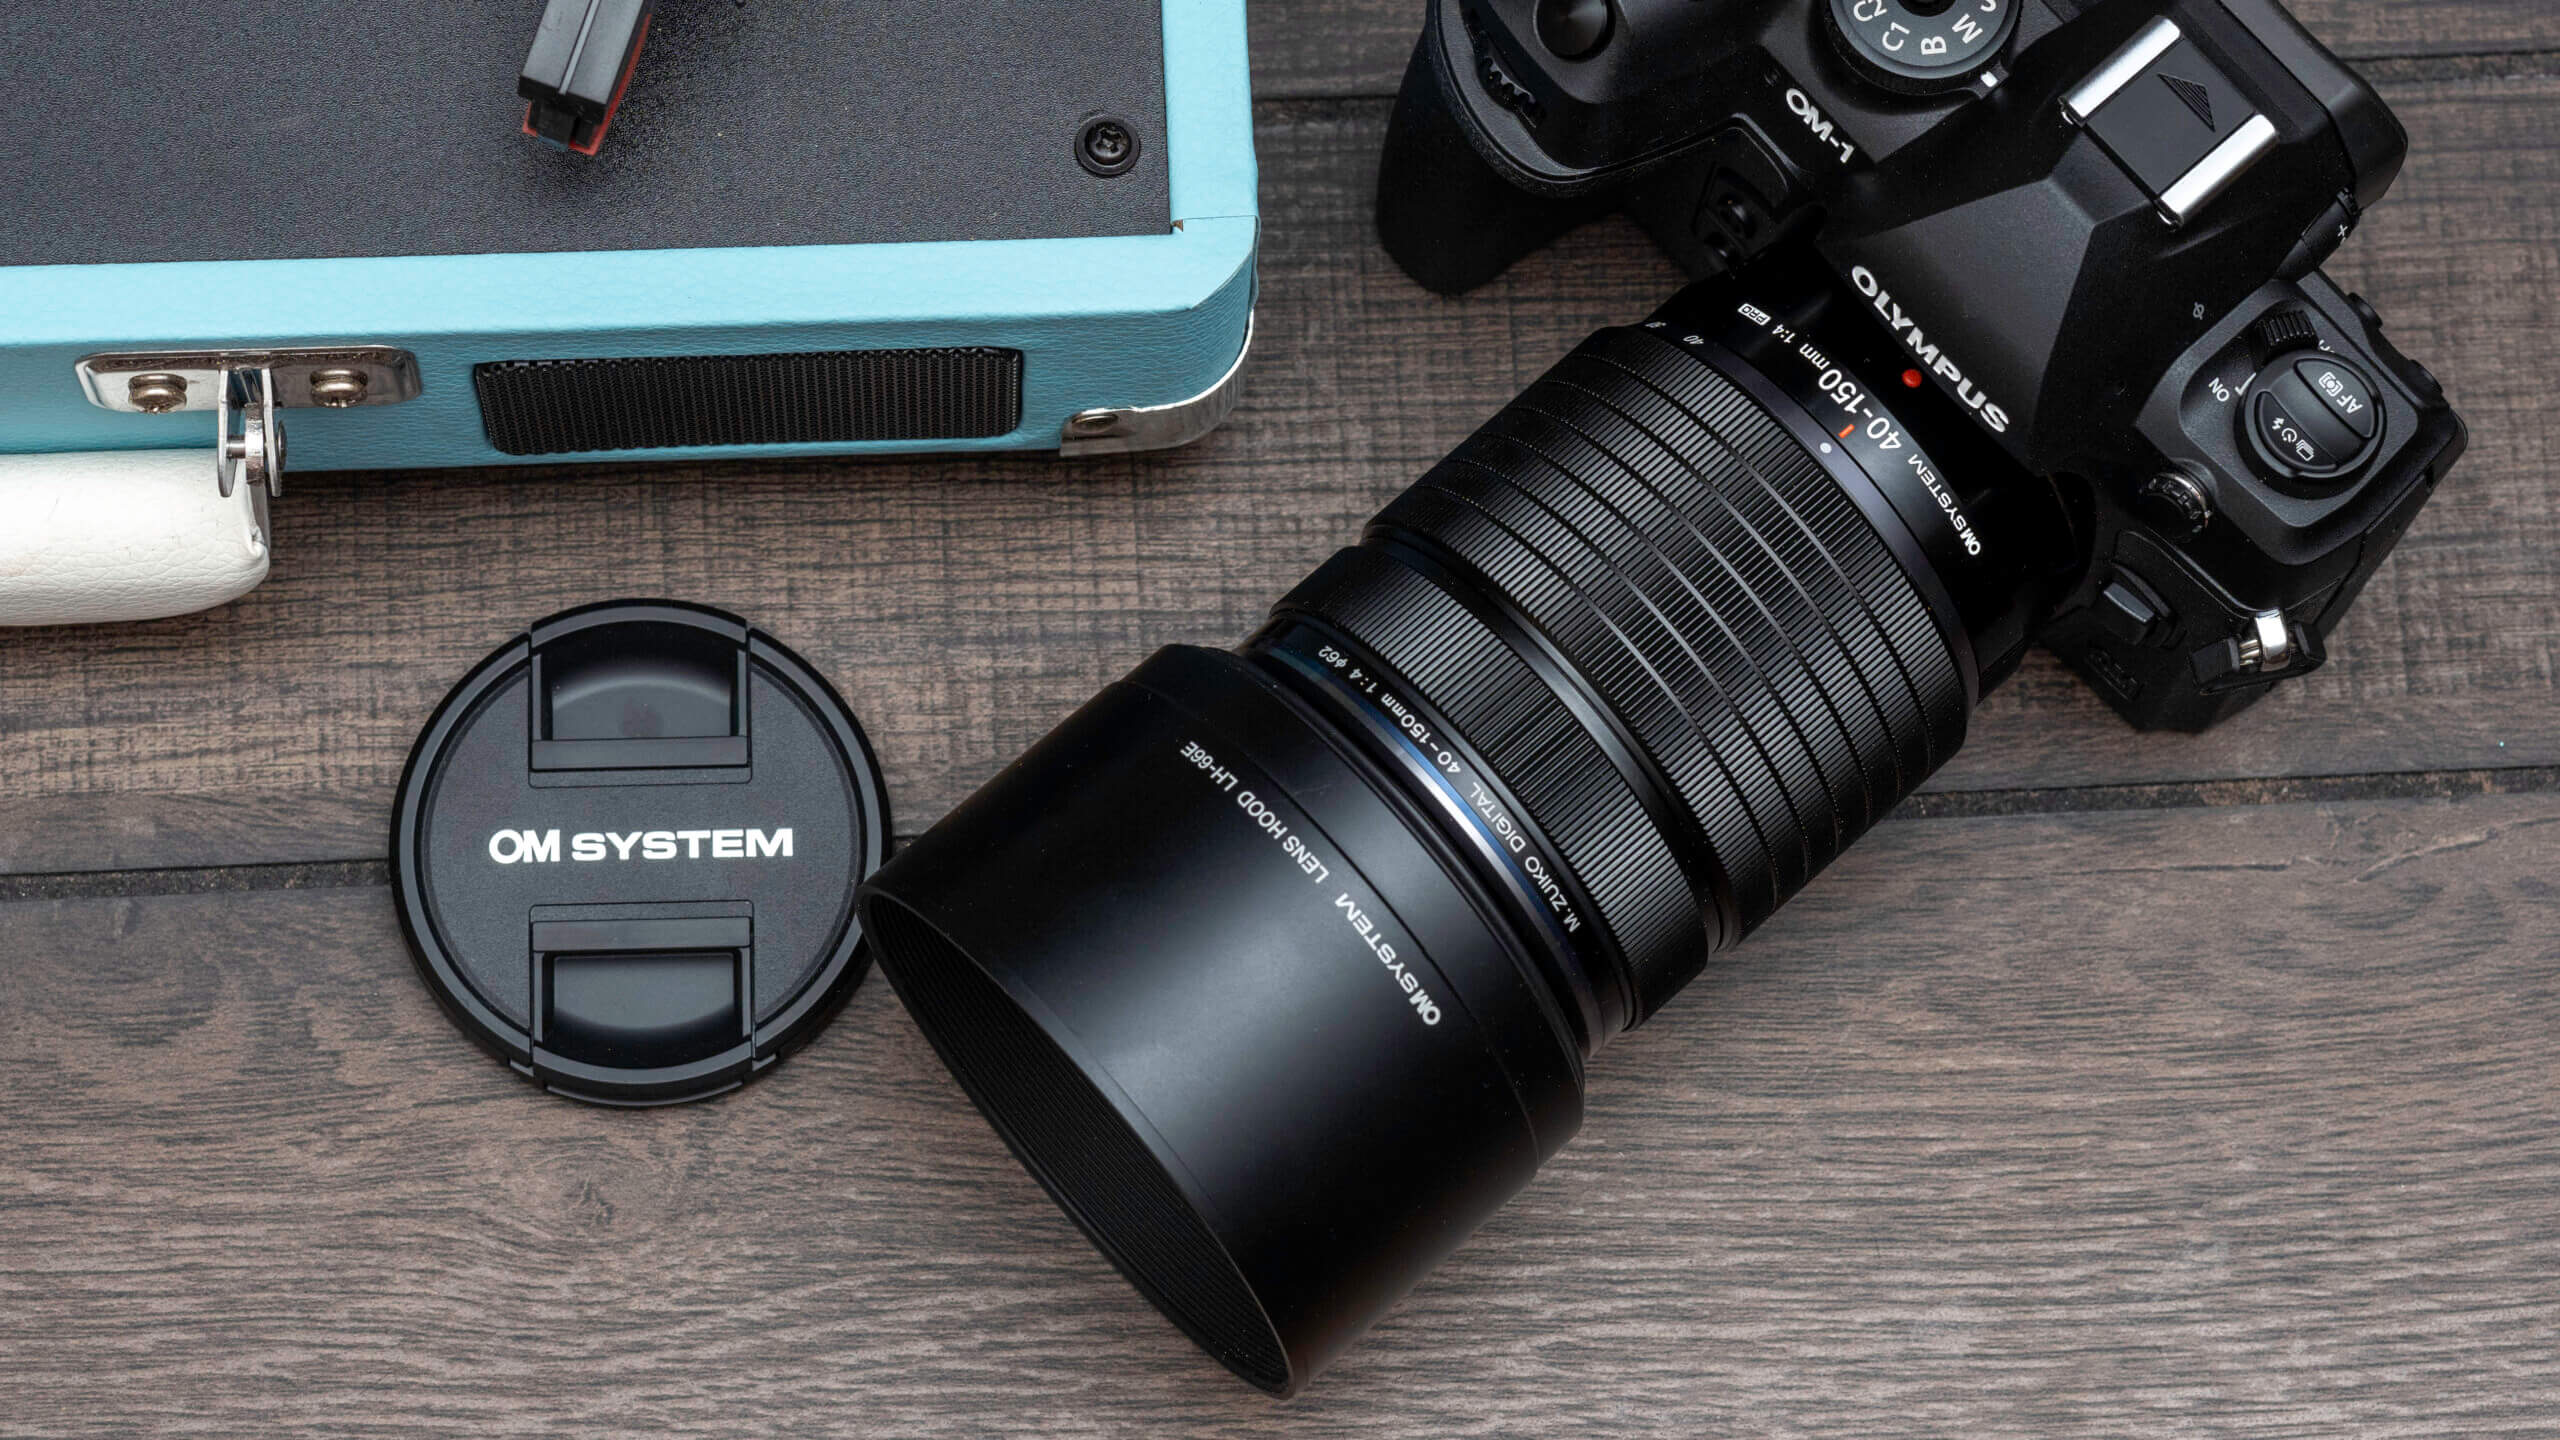 OM SYSTEM 40-150mm f/4 Pro review: Small, powerful and razor-sharp!